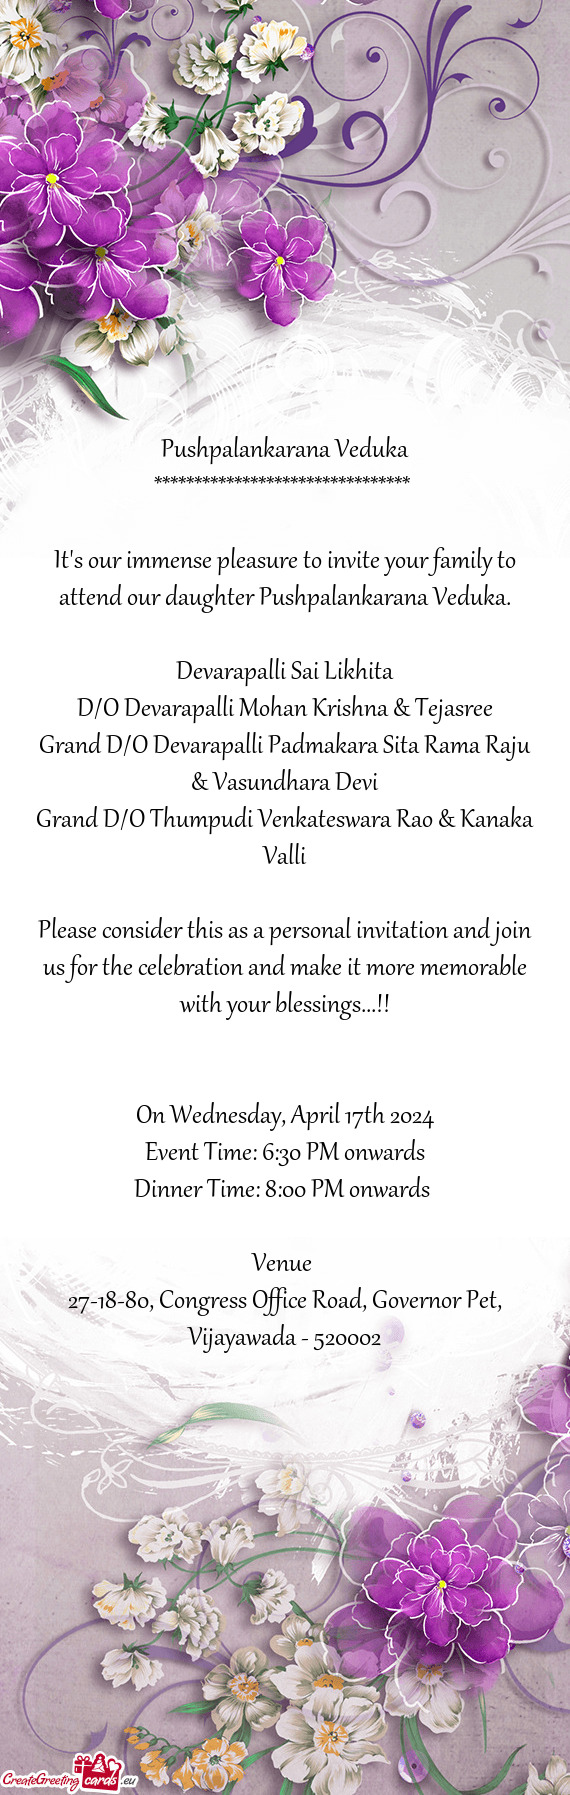 It's our immense pleasure to invite your family to attend our daughter Pushpalankarana Veduka